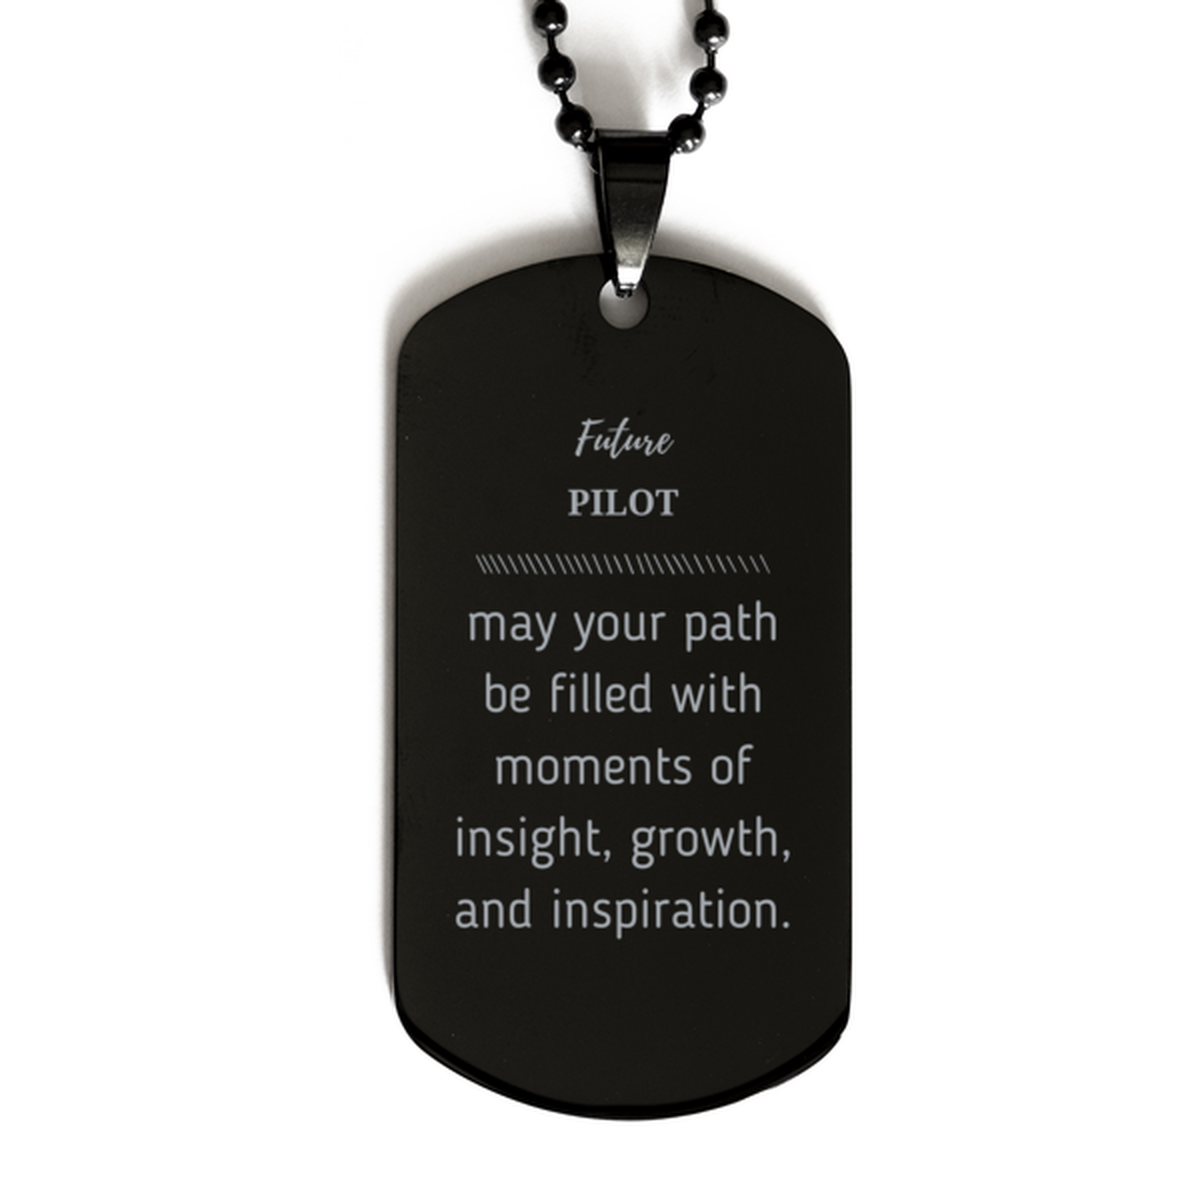 Future Pilot Gifts, May your path be filled with moments of insight, Graduation Gifts for New Pilot, Christmas Unique Black Dog Tag For Men, Women, Friends